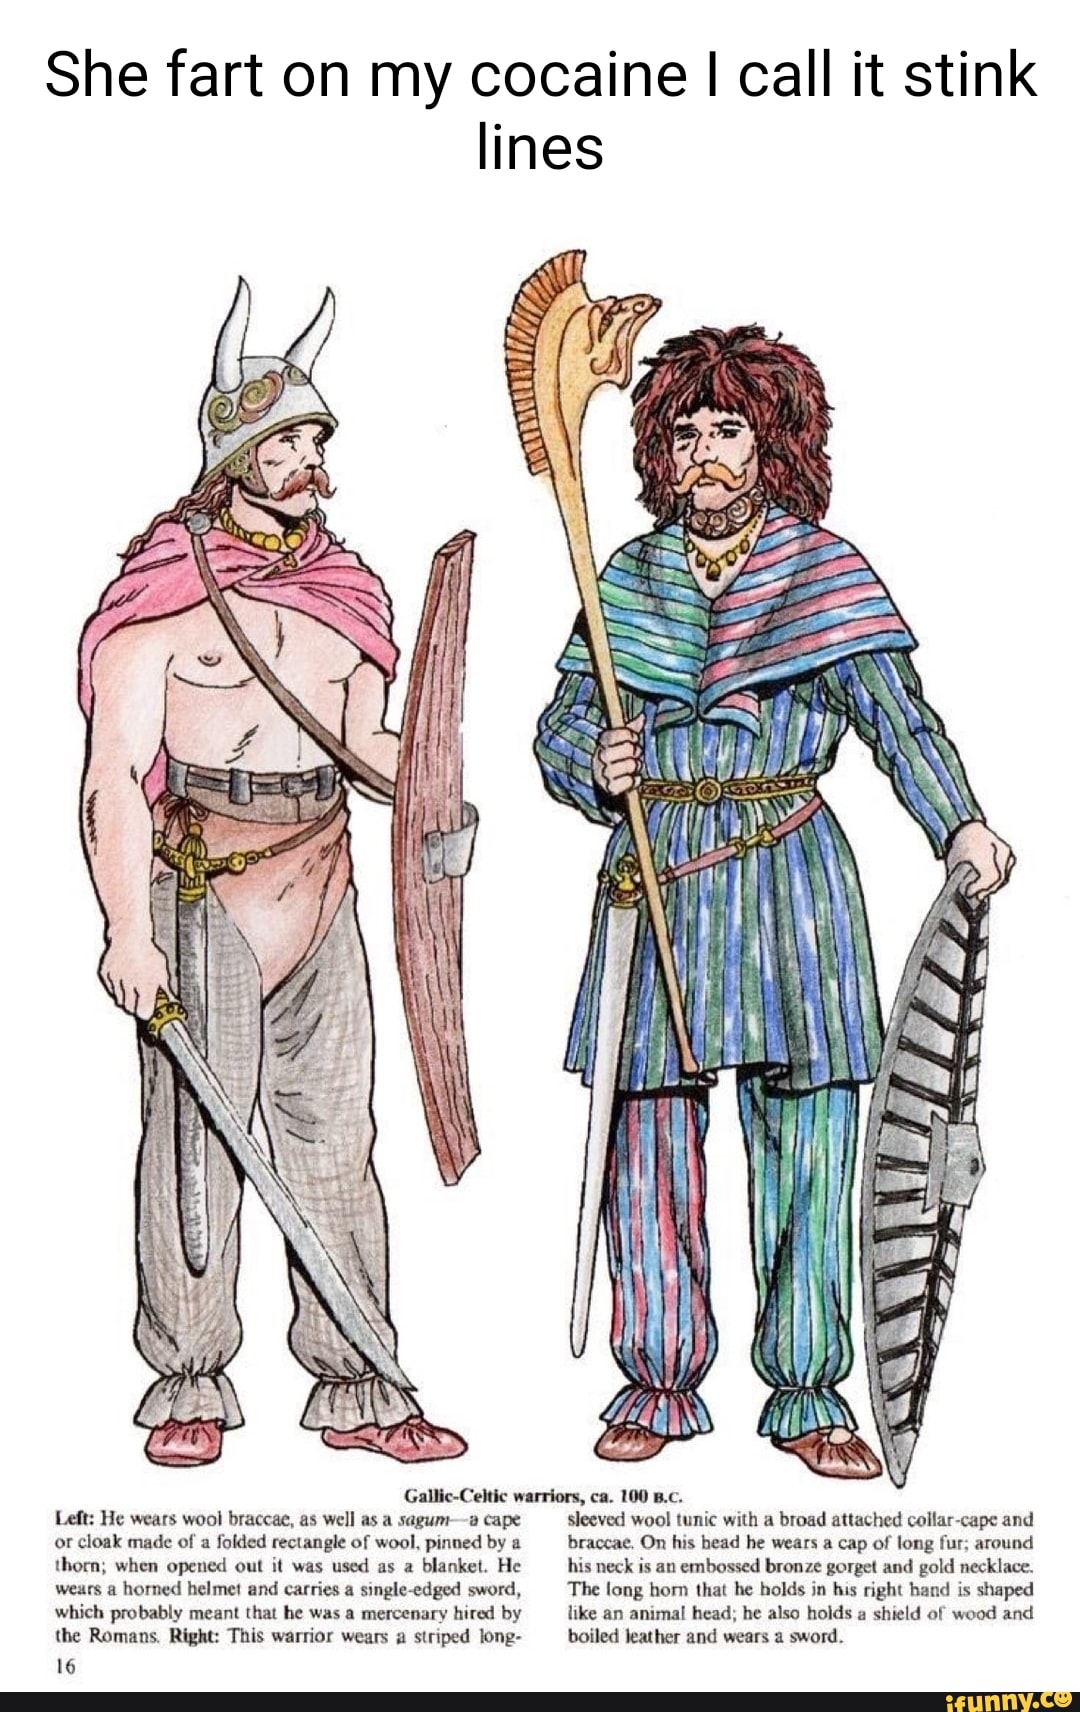 She fart on my cocaine I call it stink lines Gallic-Celtic warriors, ca.  100 B.c. Left: He wears wool braccae, as well as a sagum-a cape or cloak  made of a folded